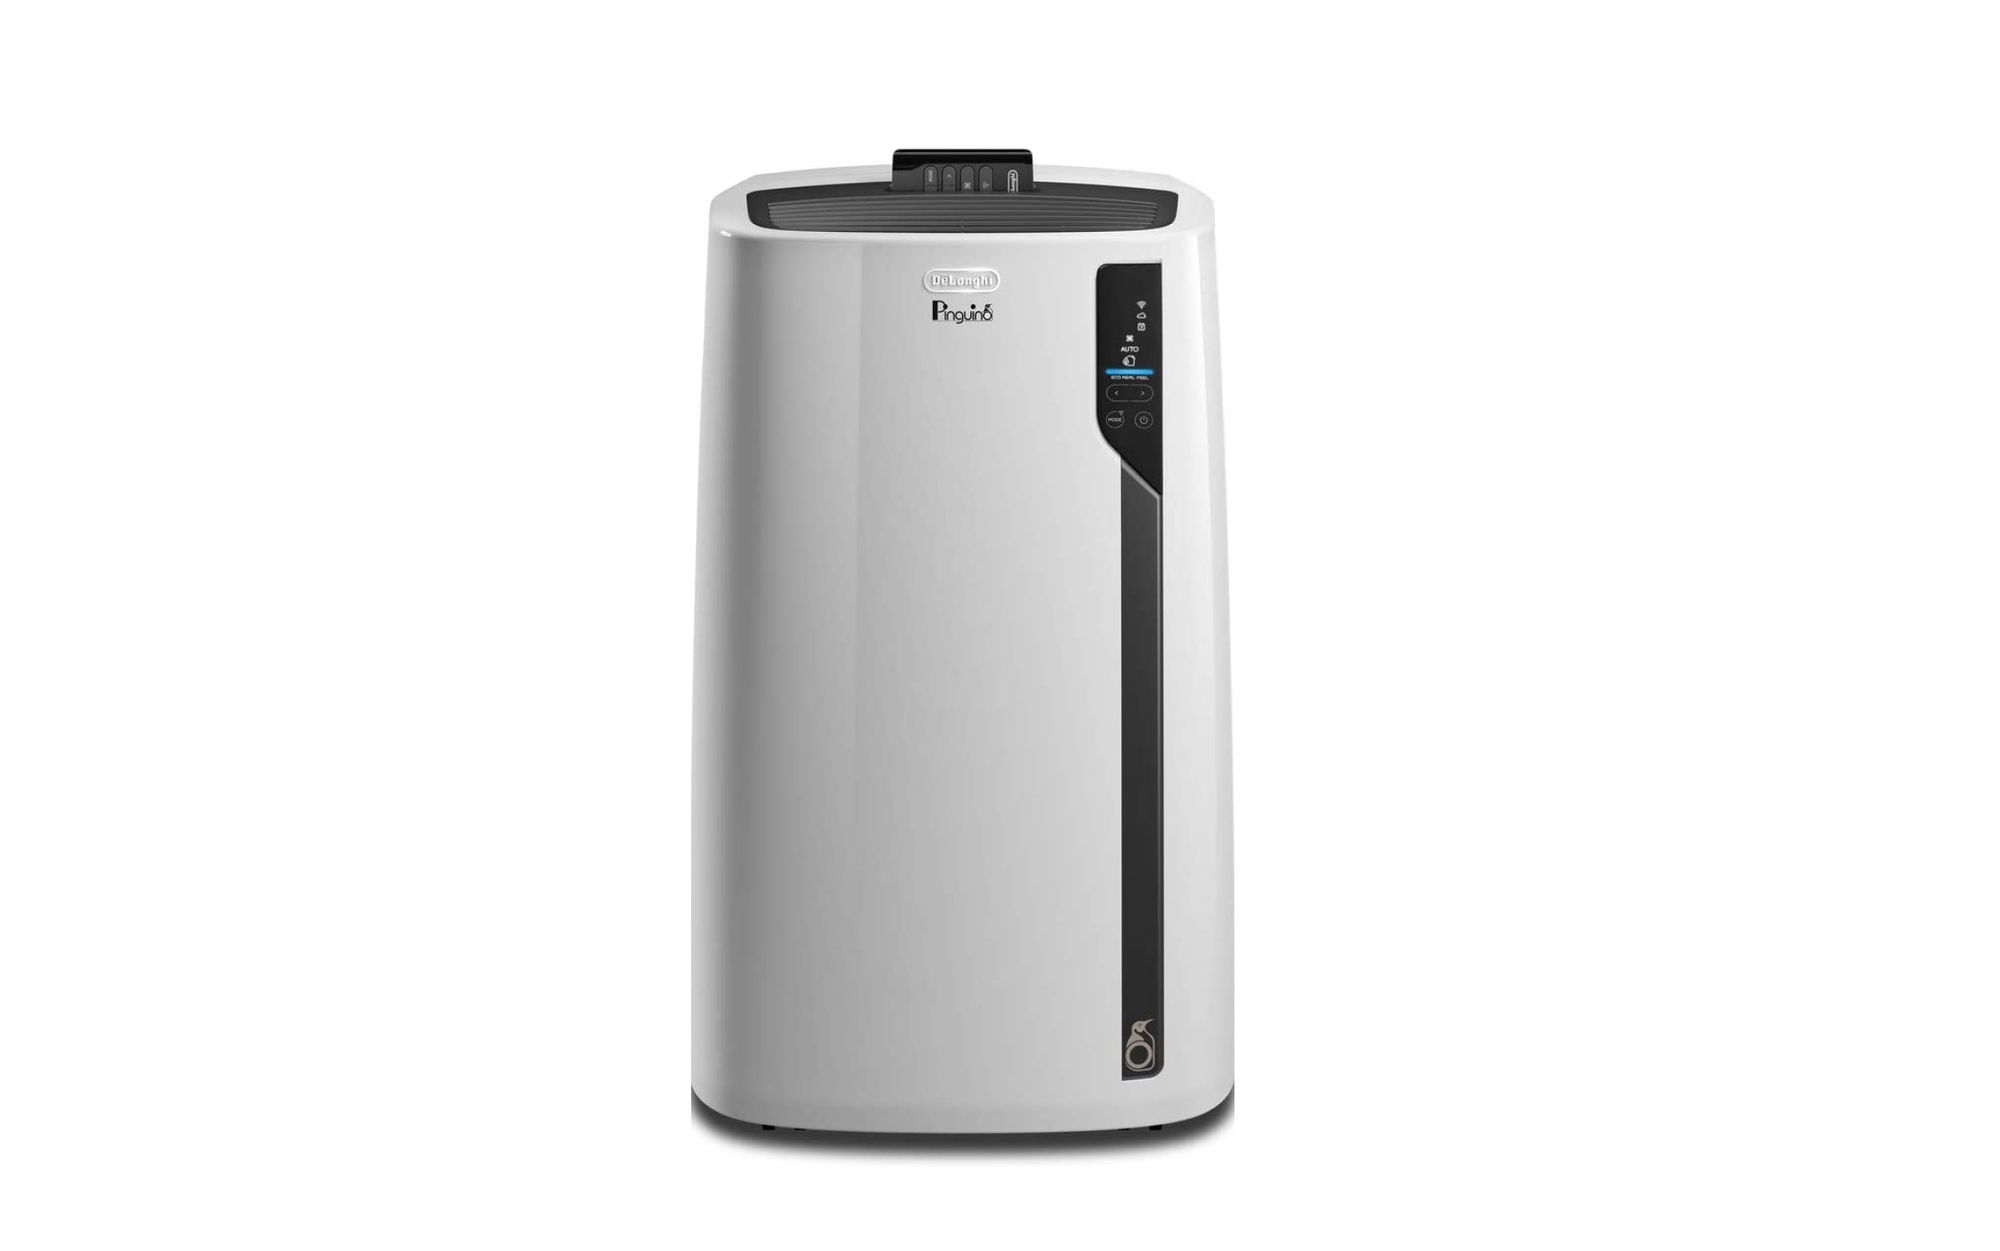 This 'Quiet' and 'Powerful' Portable Air Conditioner Has a $130